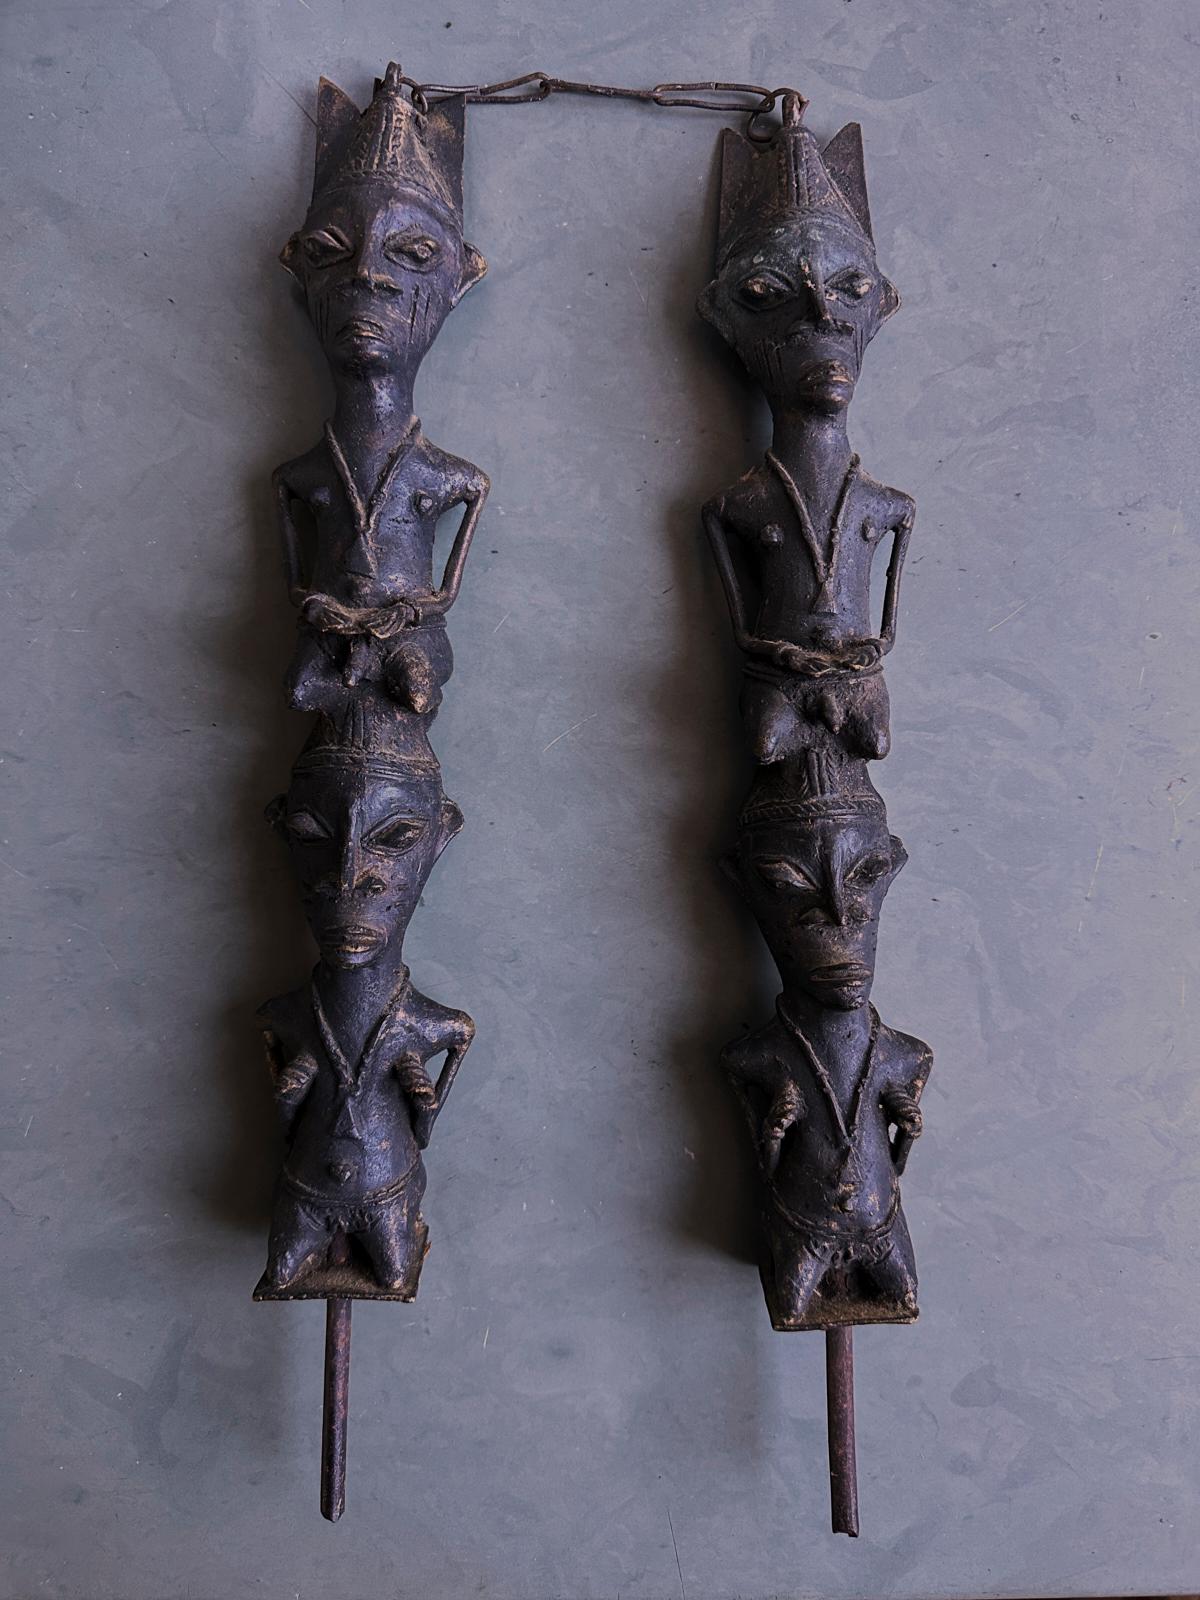 Pair of Bronze & Iron Ogboni Society staffs from the Yoruba People, Nigeria, early 20th century.
Among the Yoruba, in southwestern Nigeria, there was and still is the Ogboni secret society, which exerts an influence over the social and religious